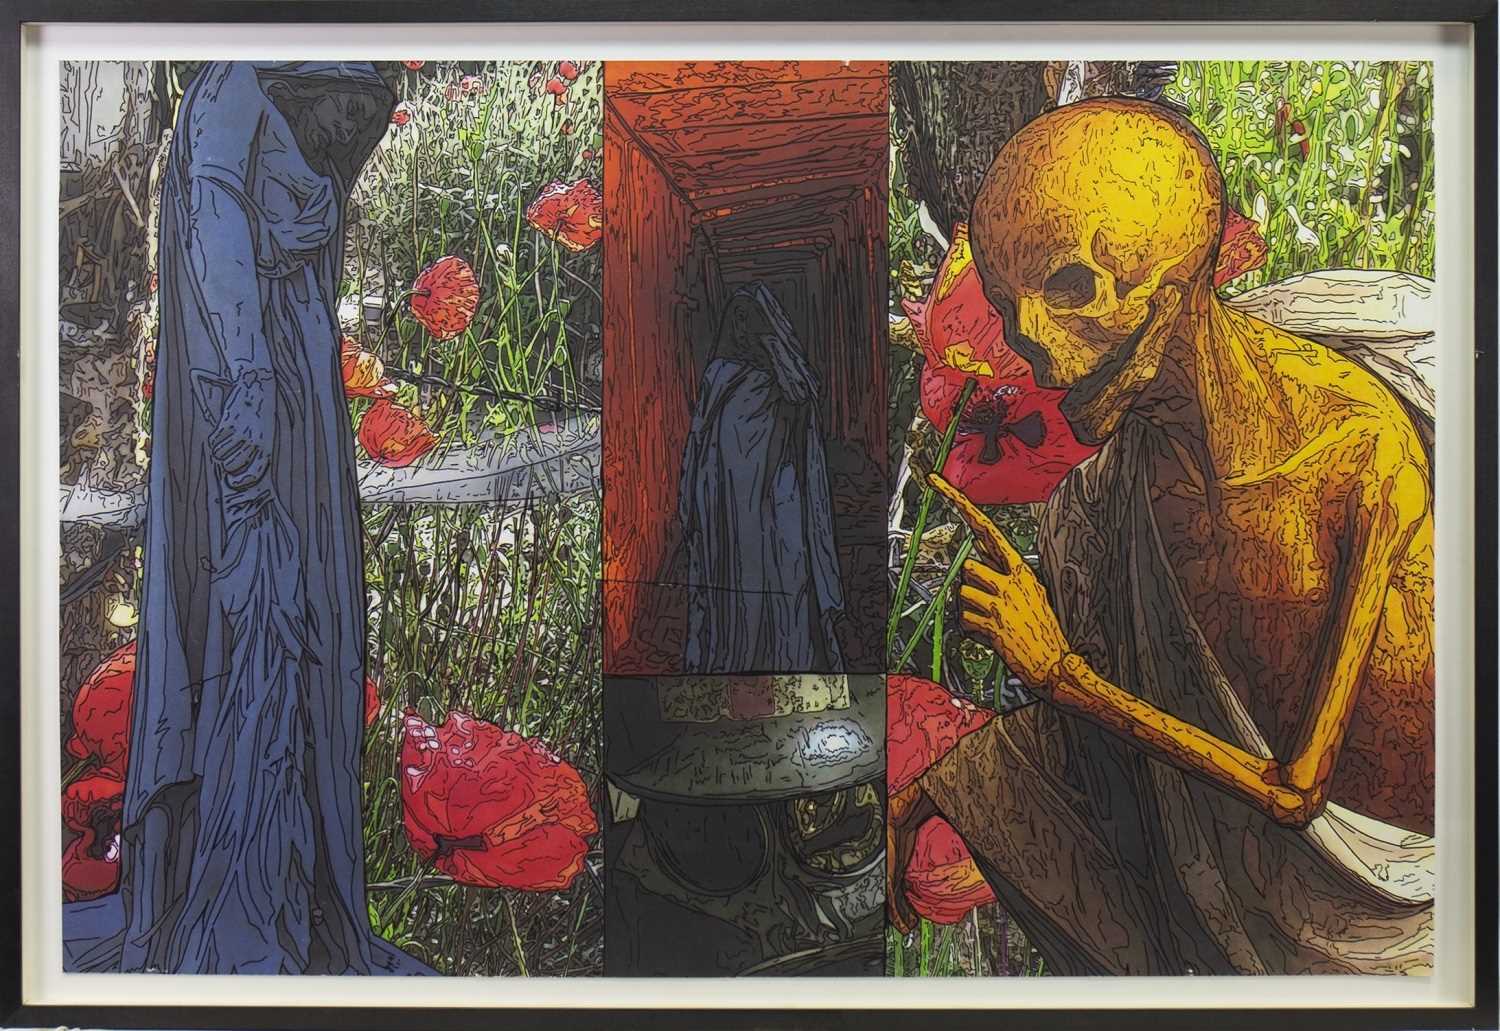 Lot 76 - LIFE AND DEATH, A MIXED MEDIA PRINT BY PETER J SCOTT